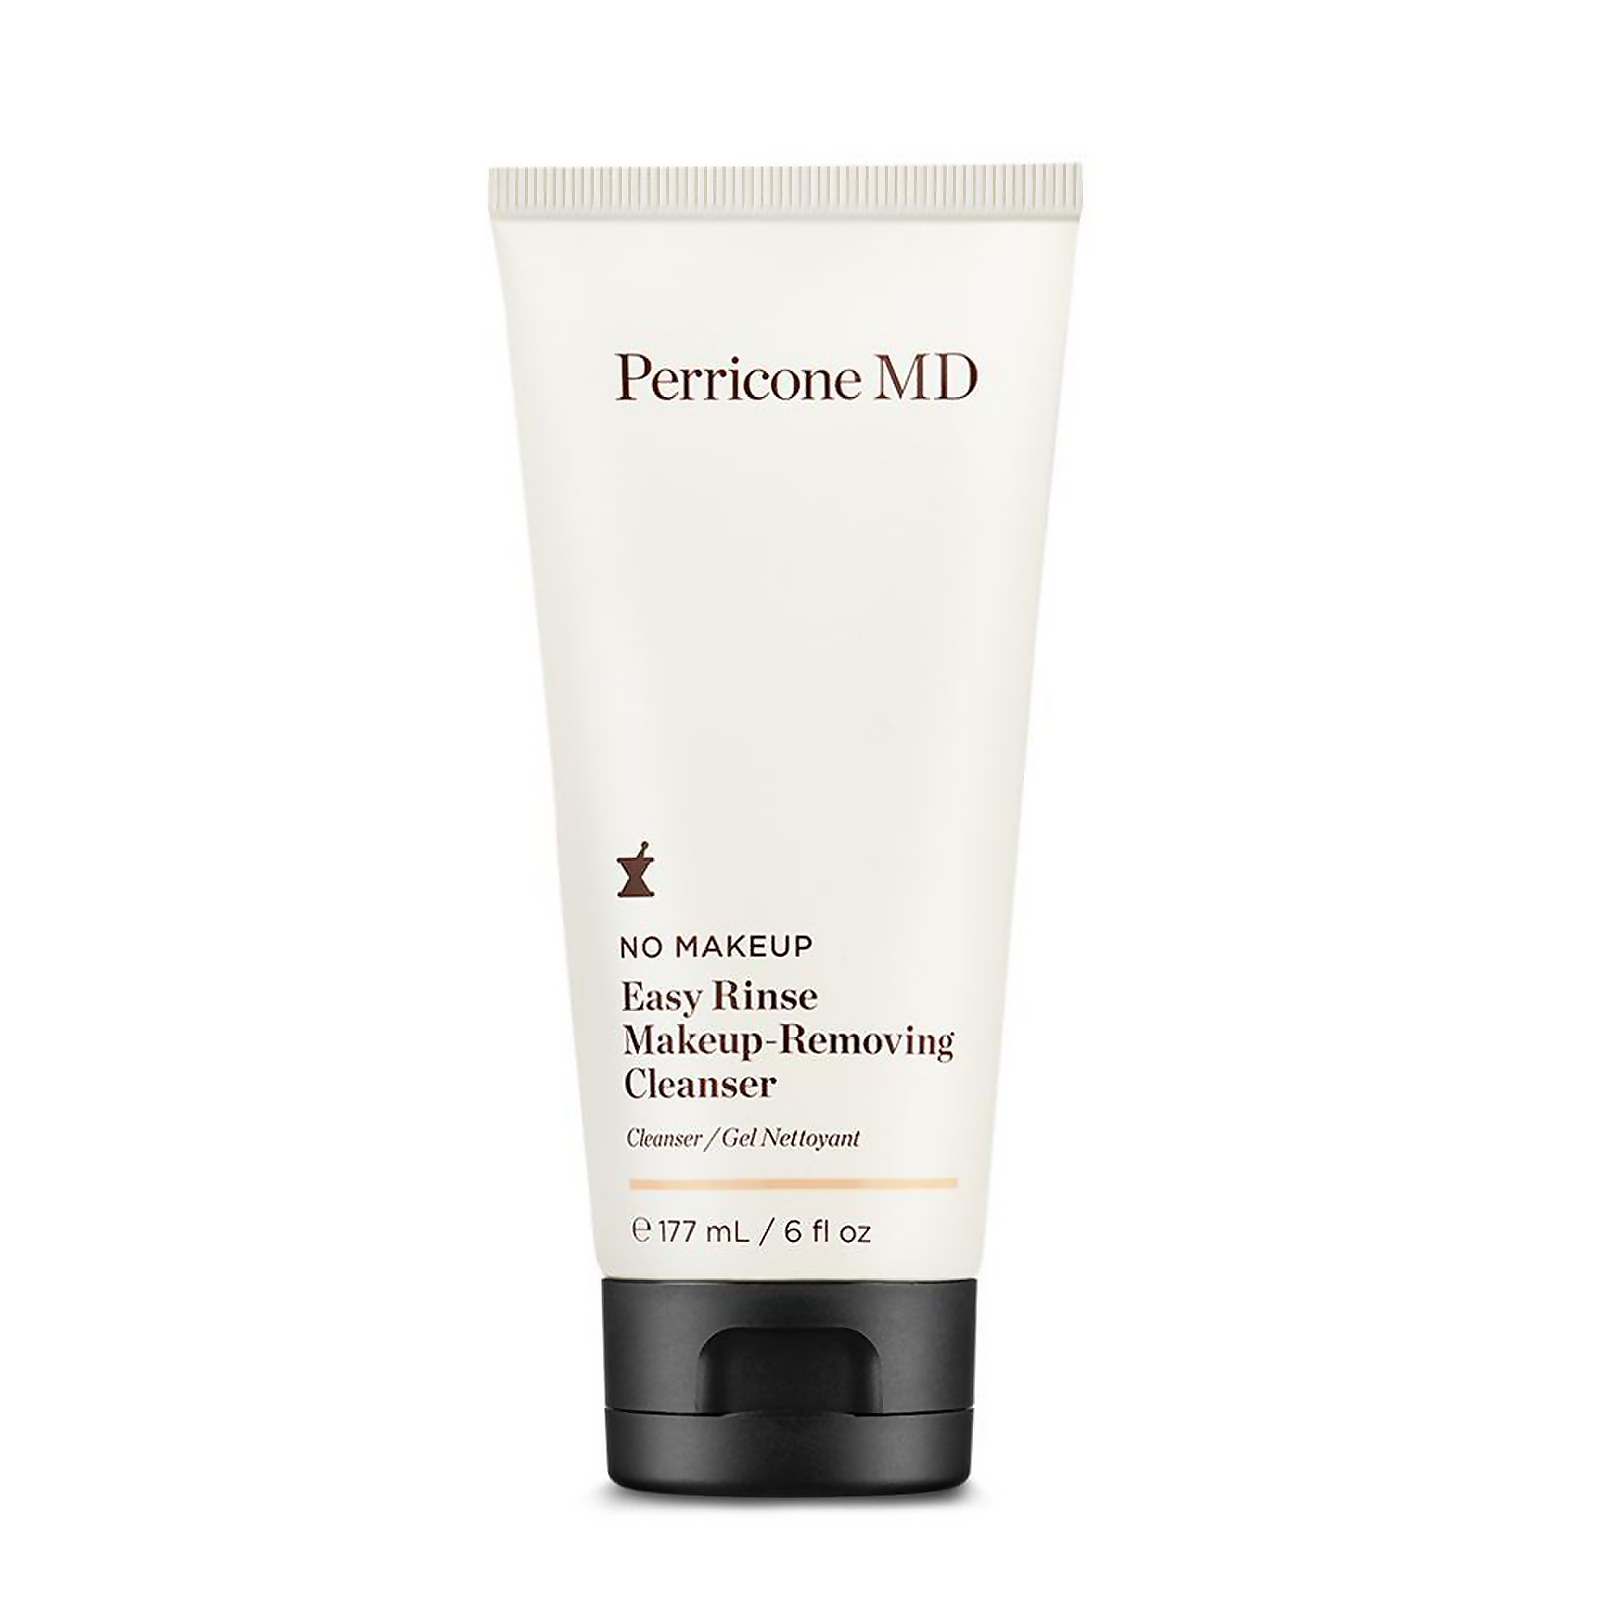 Perricone MD No Makeup Easy Rinse Makeup-Removing Cleanser - 117ml